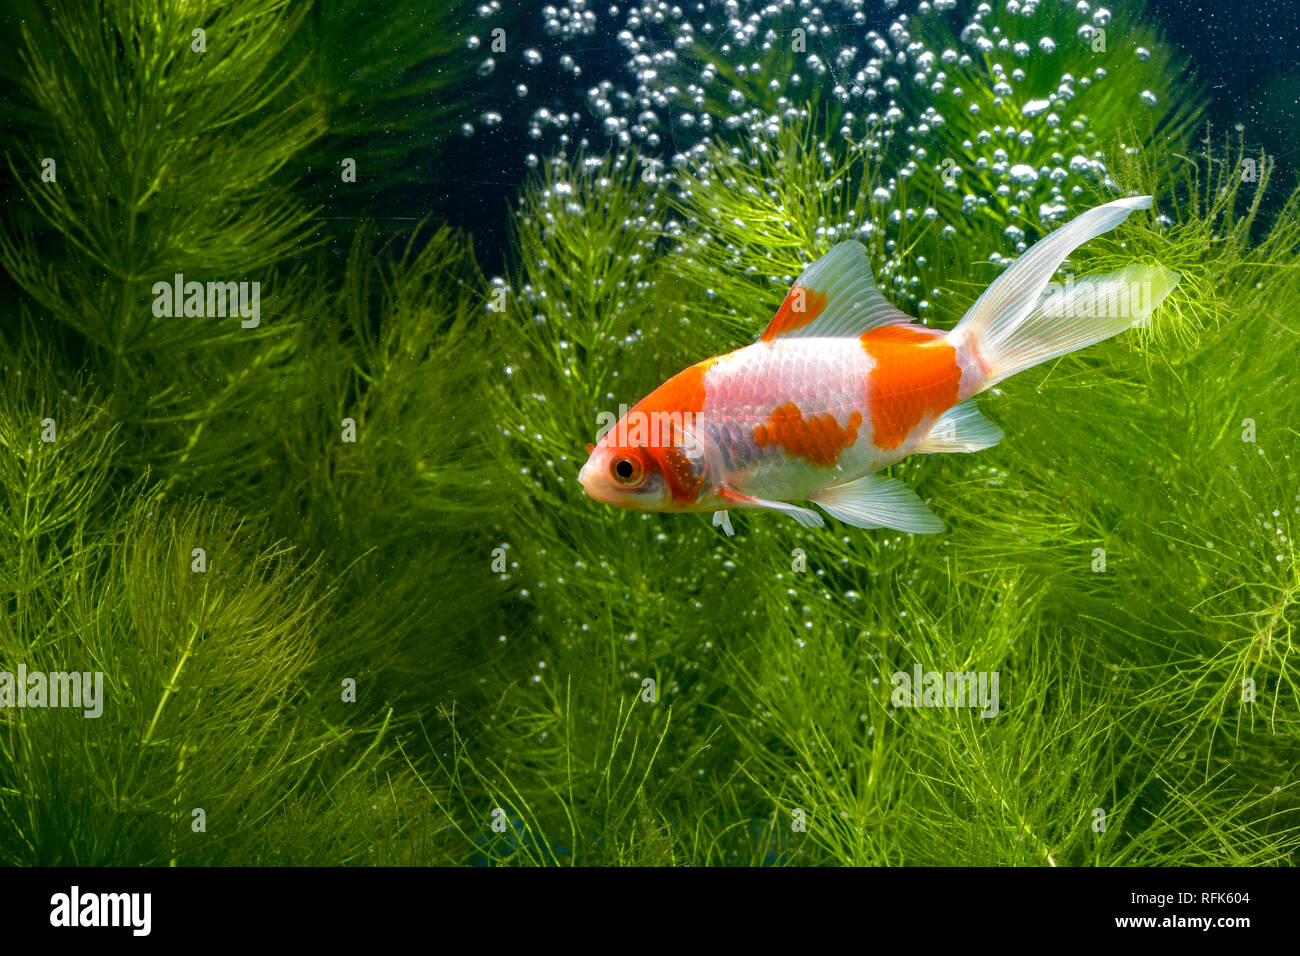 Koi fish with natural background Stock Photo